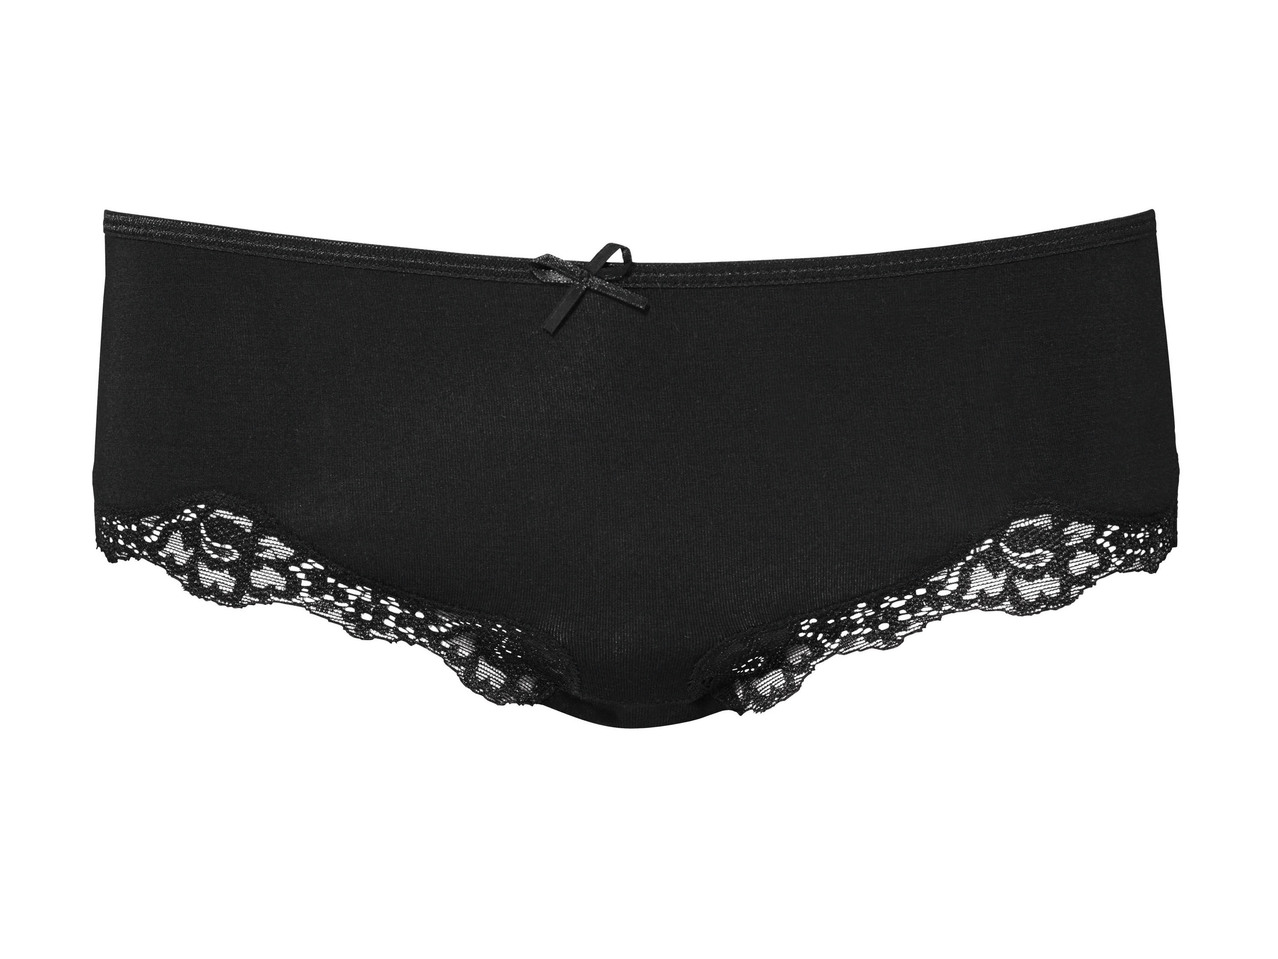 Ladies' Lace Hipster Briefs or Briefs